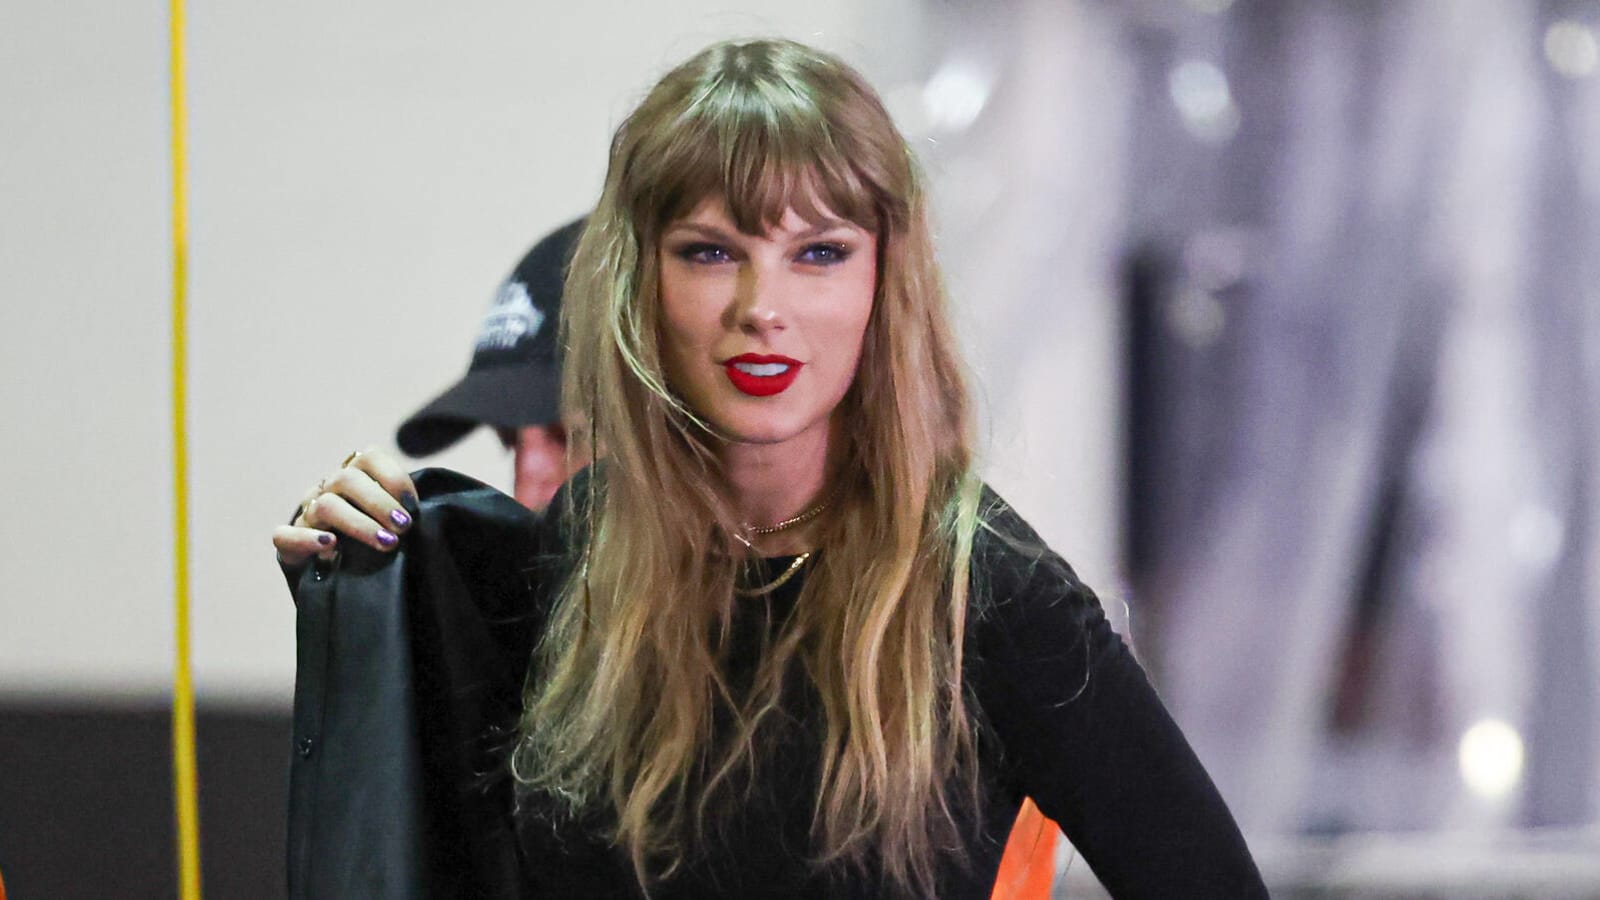 NFL pressured TV networks to give Taylor Swift free promos